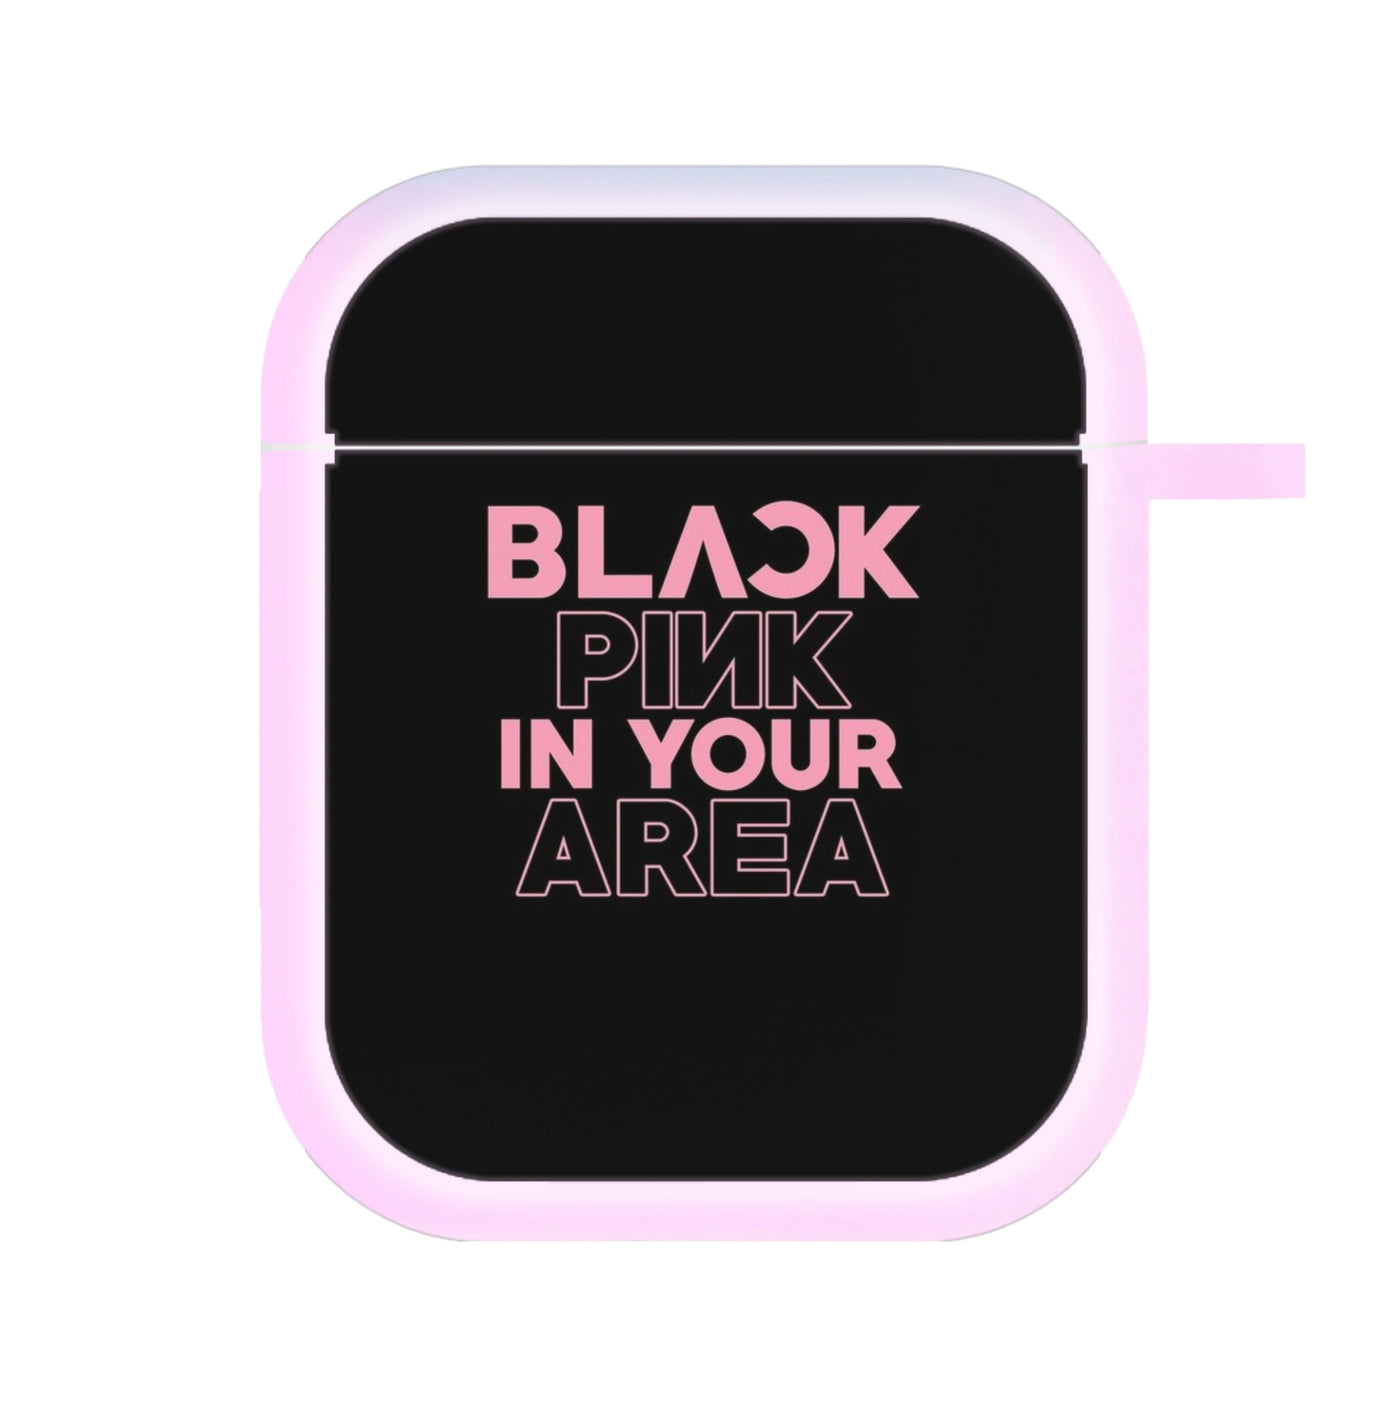 Blackpink In Your Area - Black AirPods Case